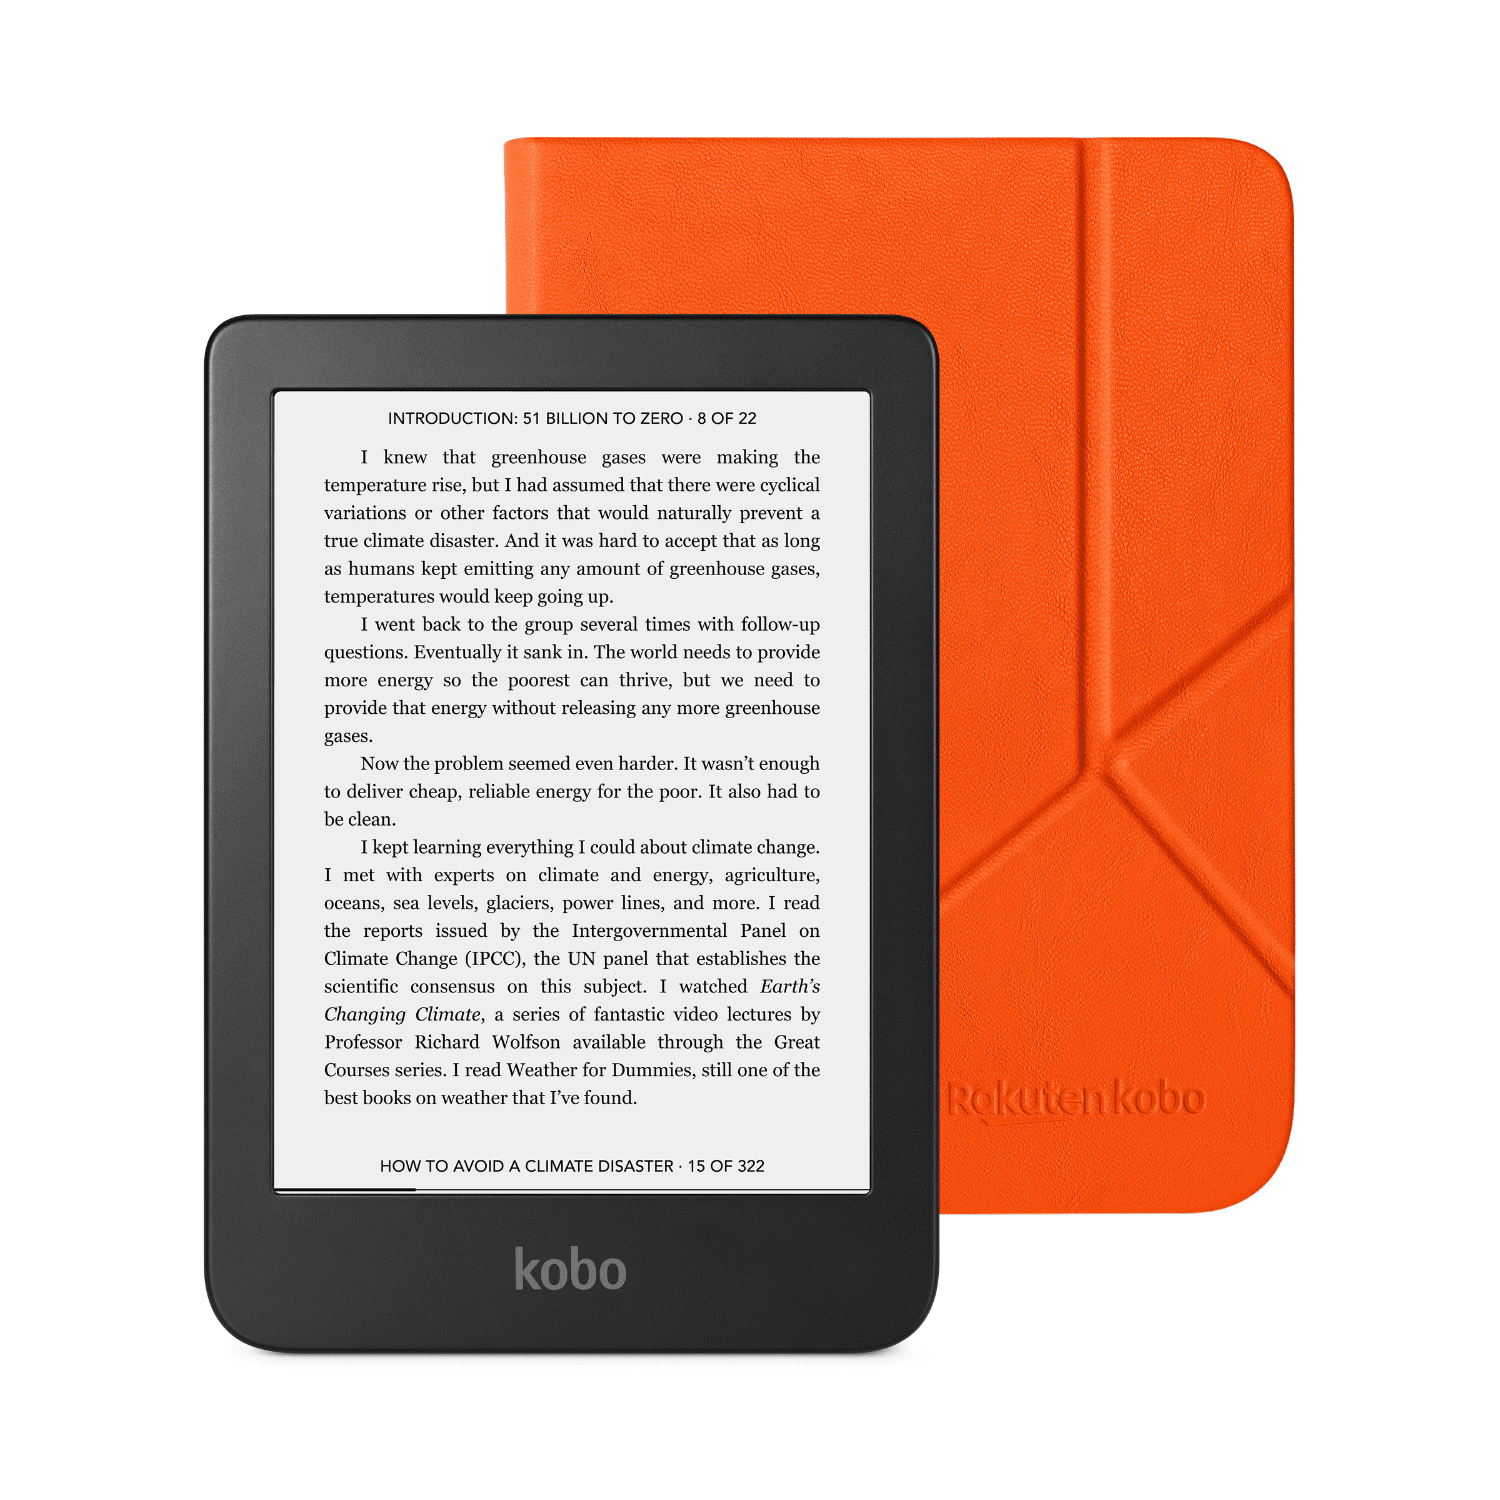 Case for Kobo Nia 2020 6 Inch E-Book Cover Etui with Stand and Auto  Sleep/Wake Feature Black